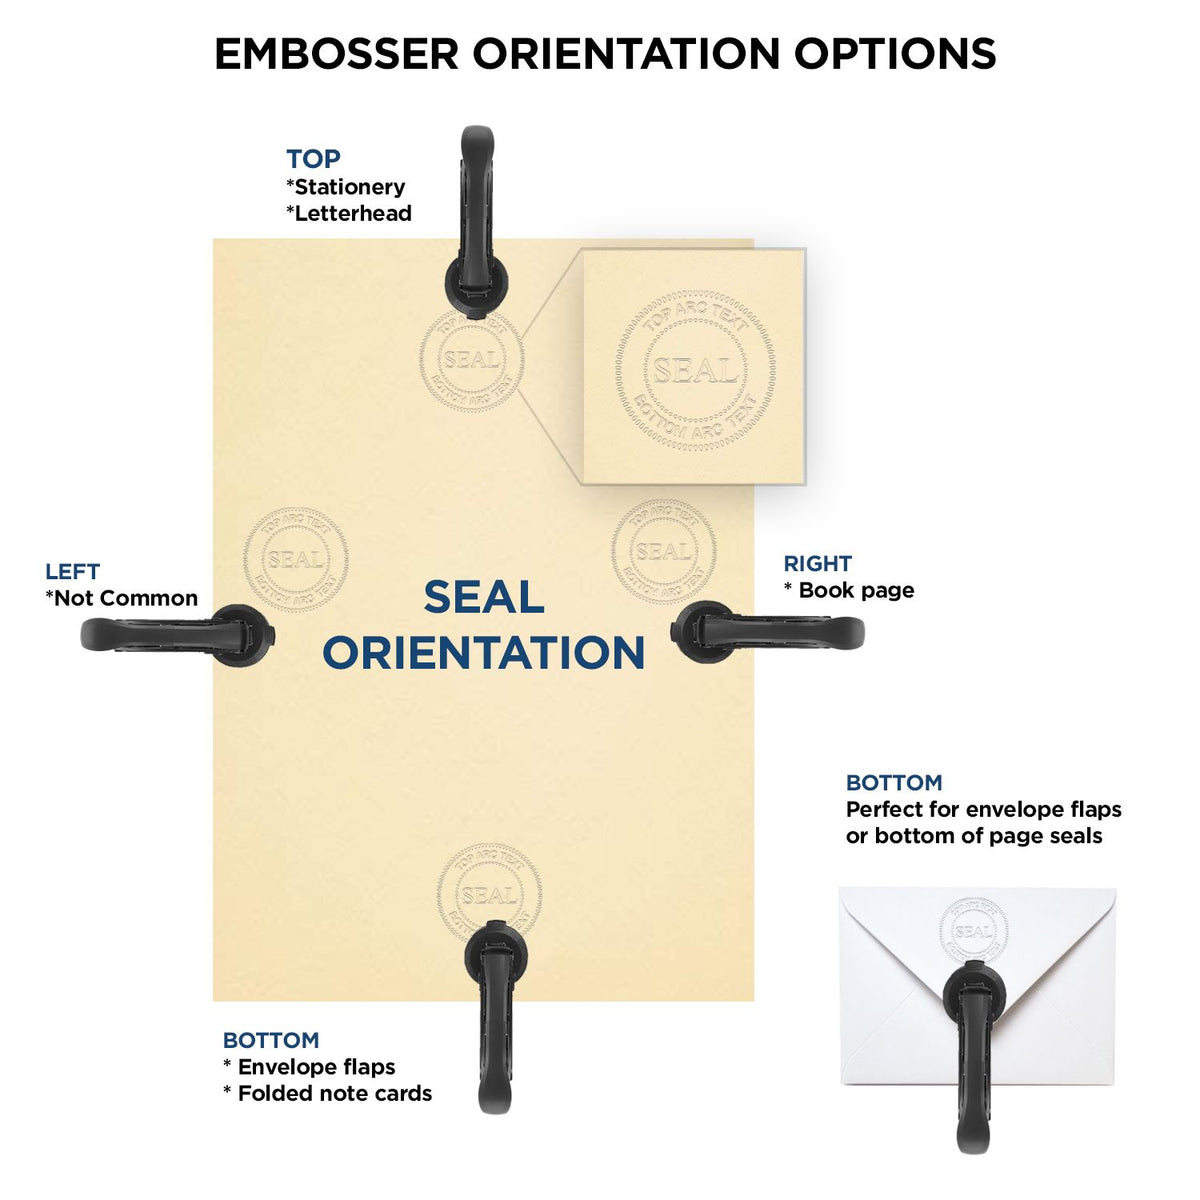 An infographic for the Handheld Washington Professional Engineer Embosser showing embosser orientation, this is showing examples of a top, bottom, right and left insert.